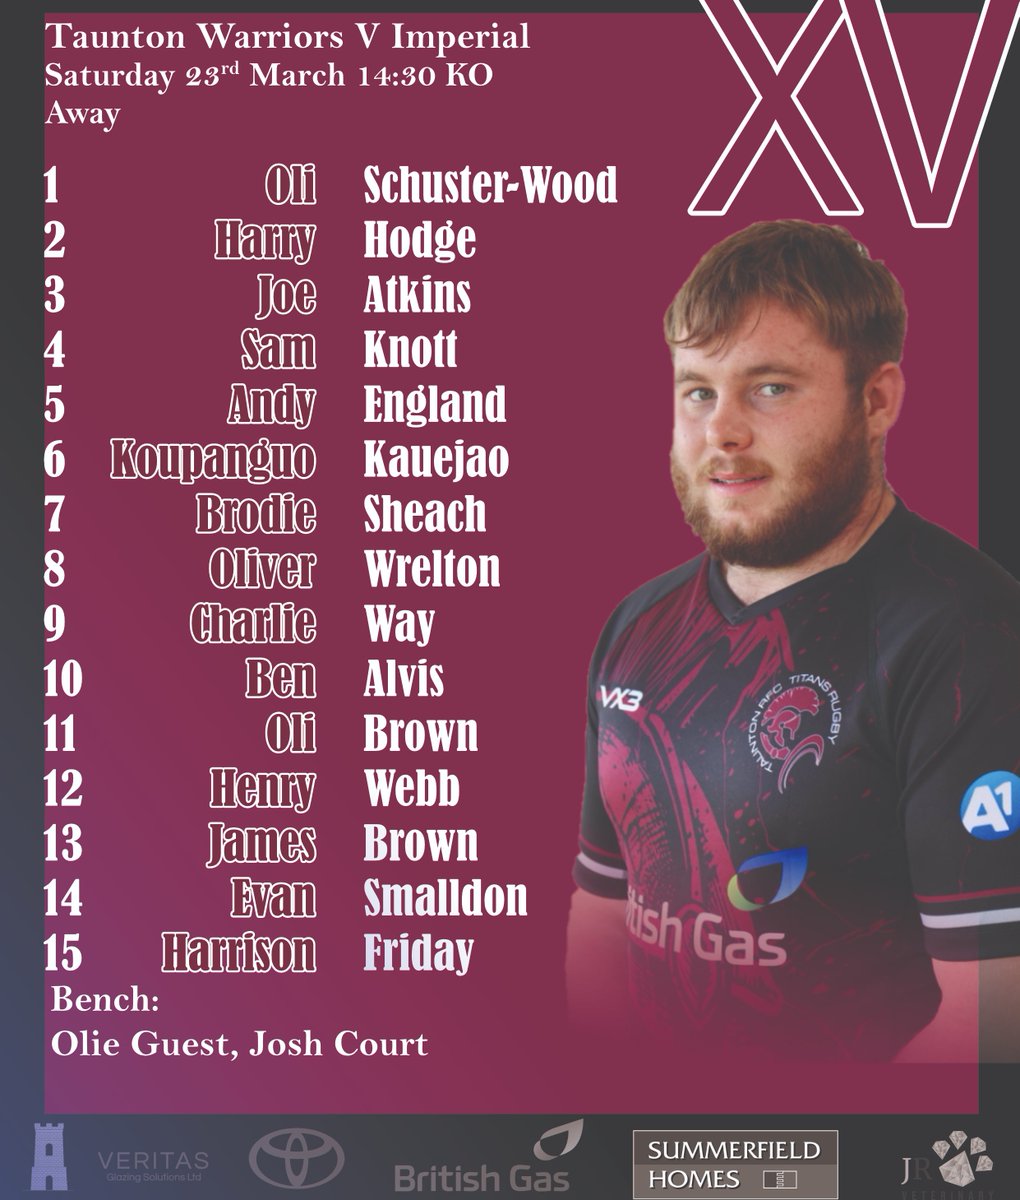 🚨🚨 Team News🚨🚨 Here is your Taunton Titans squad that will be taking on @MowdenPark Tomorrow afternoon here at Veritas Park. The Taunton Warriors will be looking to win away at Imperial and secure the league title. #Support #Local #Rugby #Taunton #Community